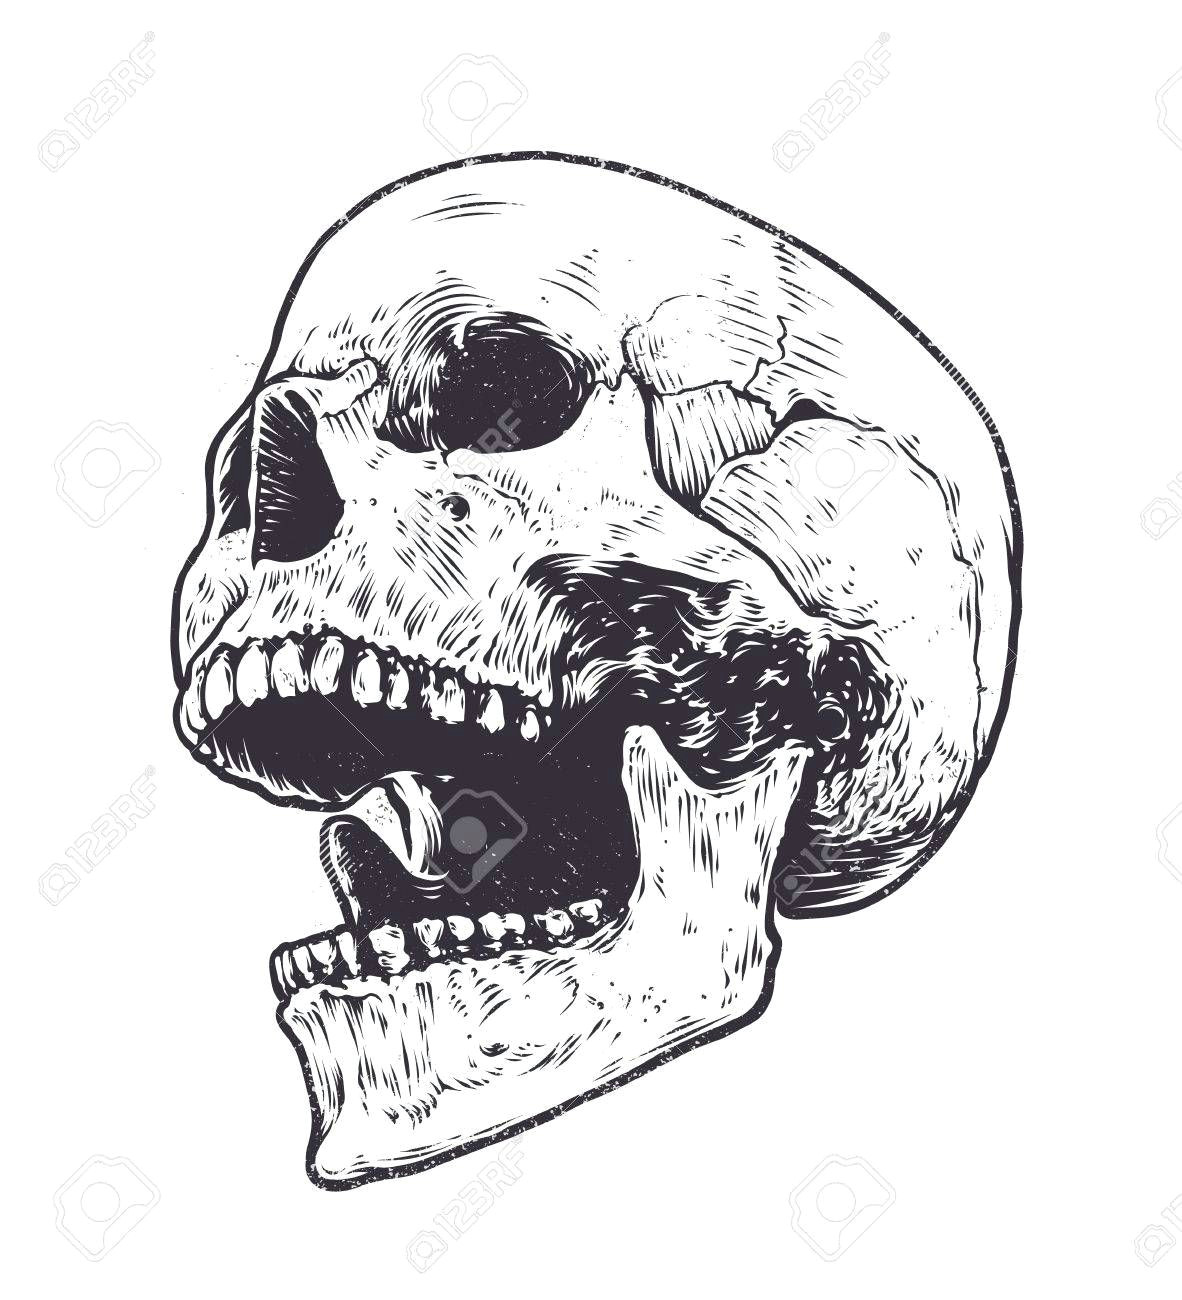 Skull Drawing Hashtags Image Result for Skull Open Mouth Drawing Tattoo Projects